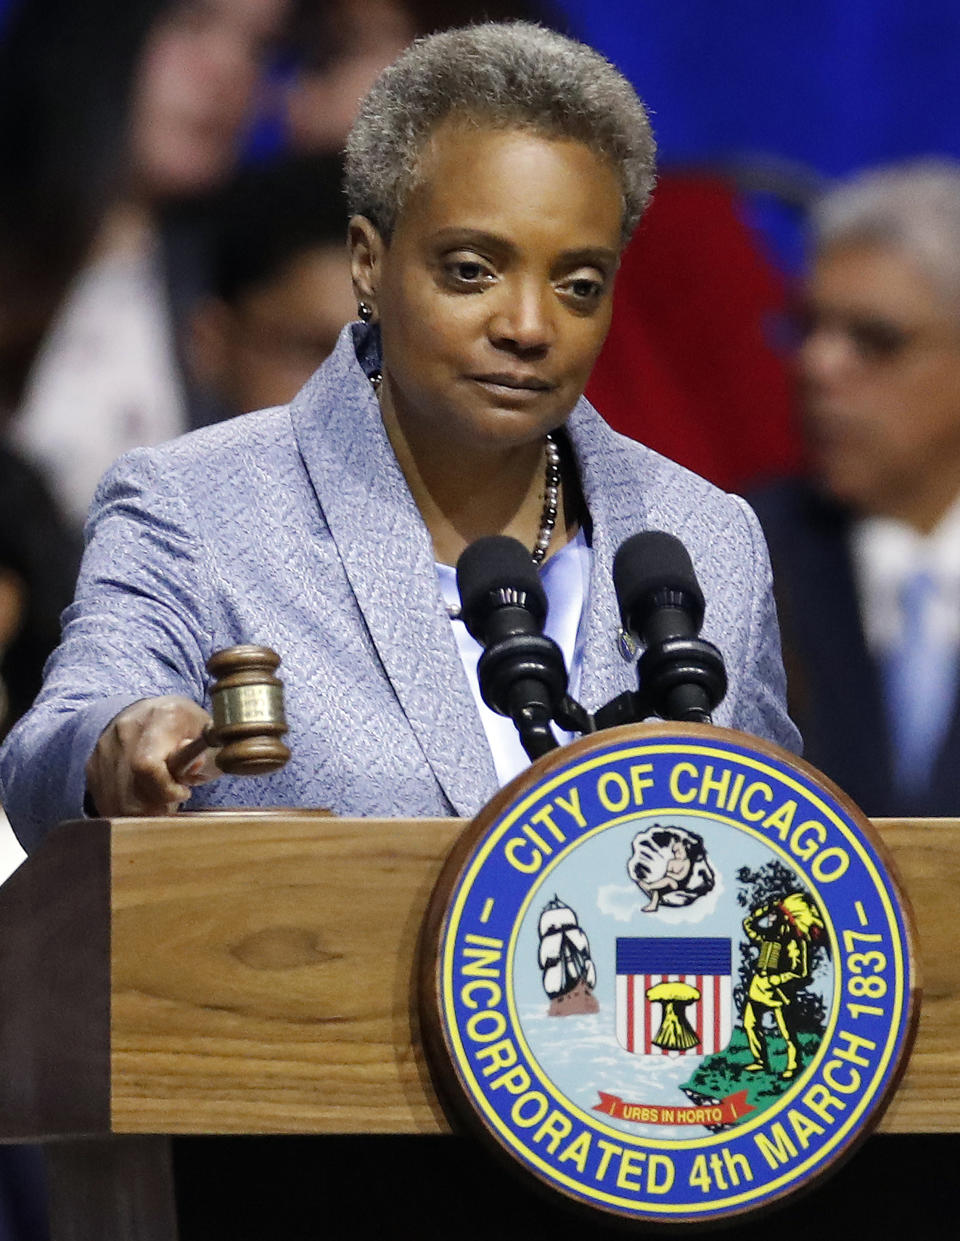 Mayor of Chicago Lori Lightfoot bangs the gavel after being sworn in at her inauguration ceremony Monday, May 20, 2019, in Chicago. (AP Photo/Jim Young)